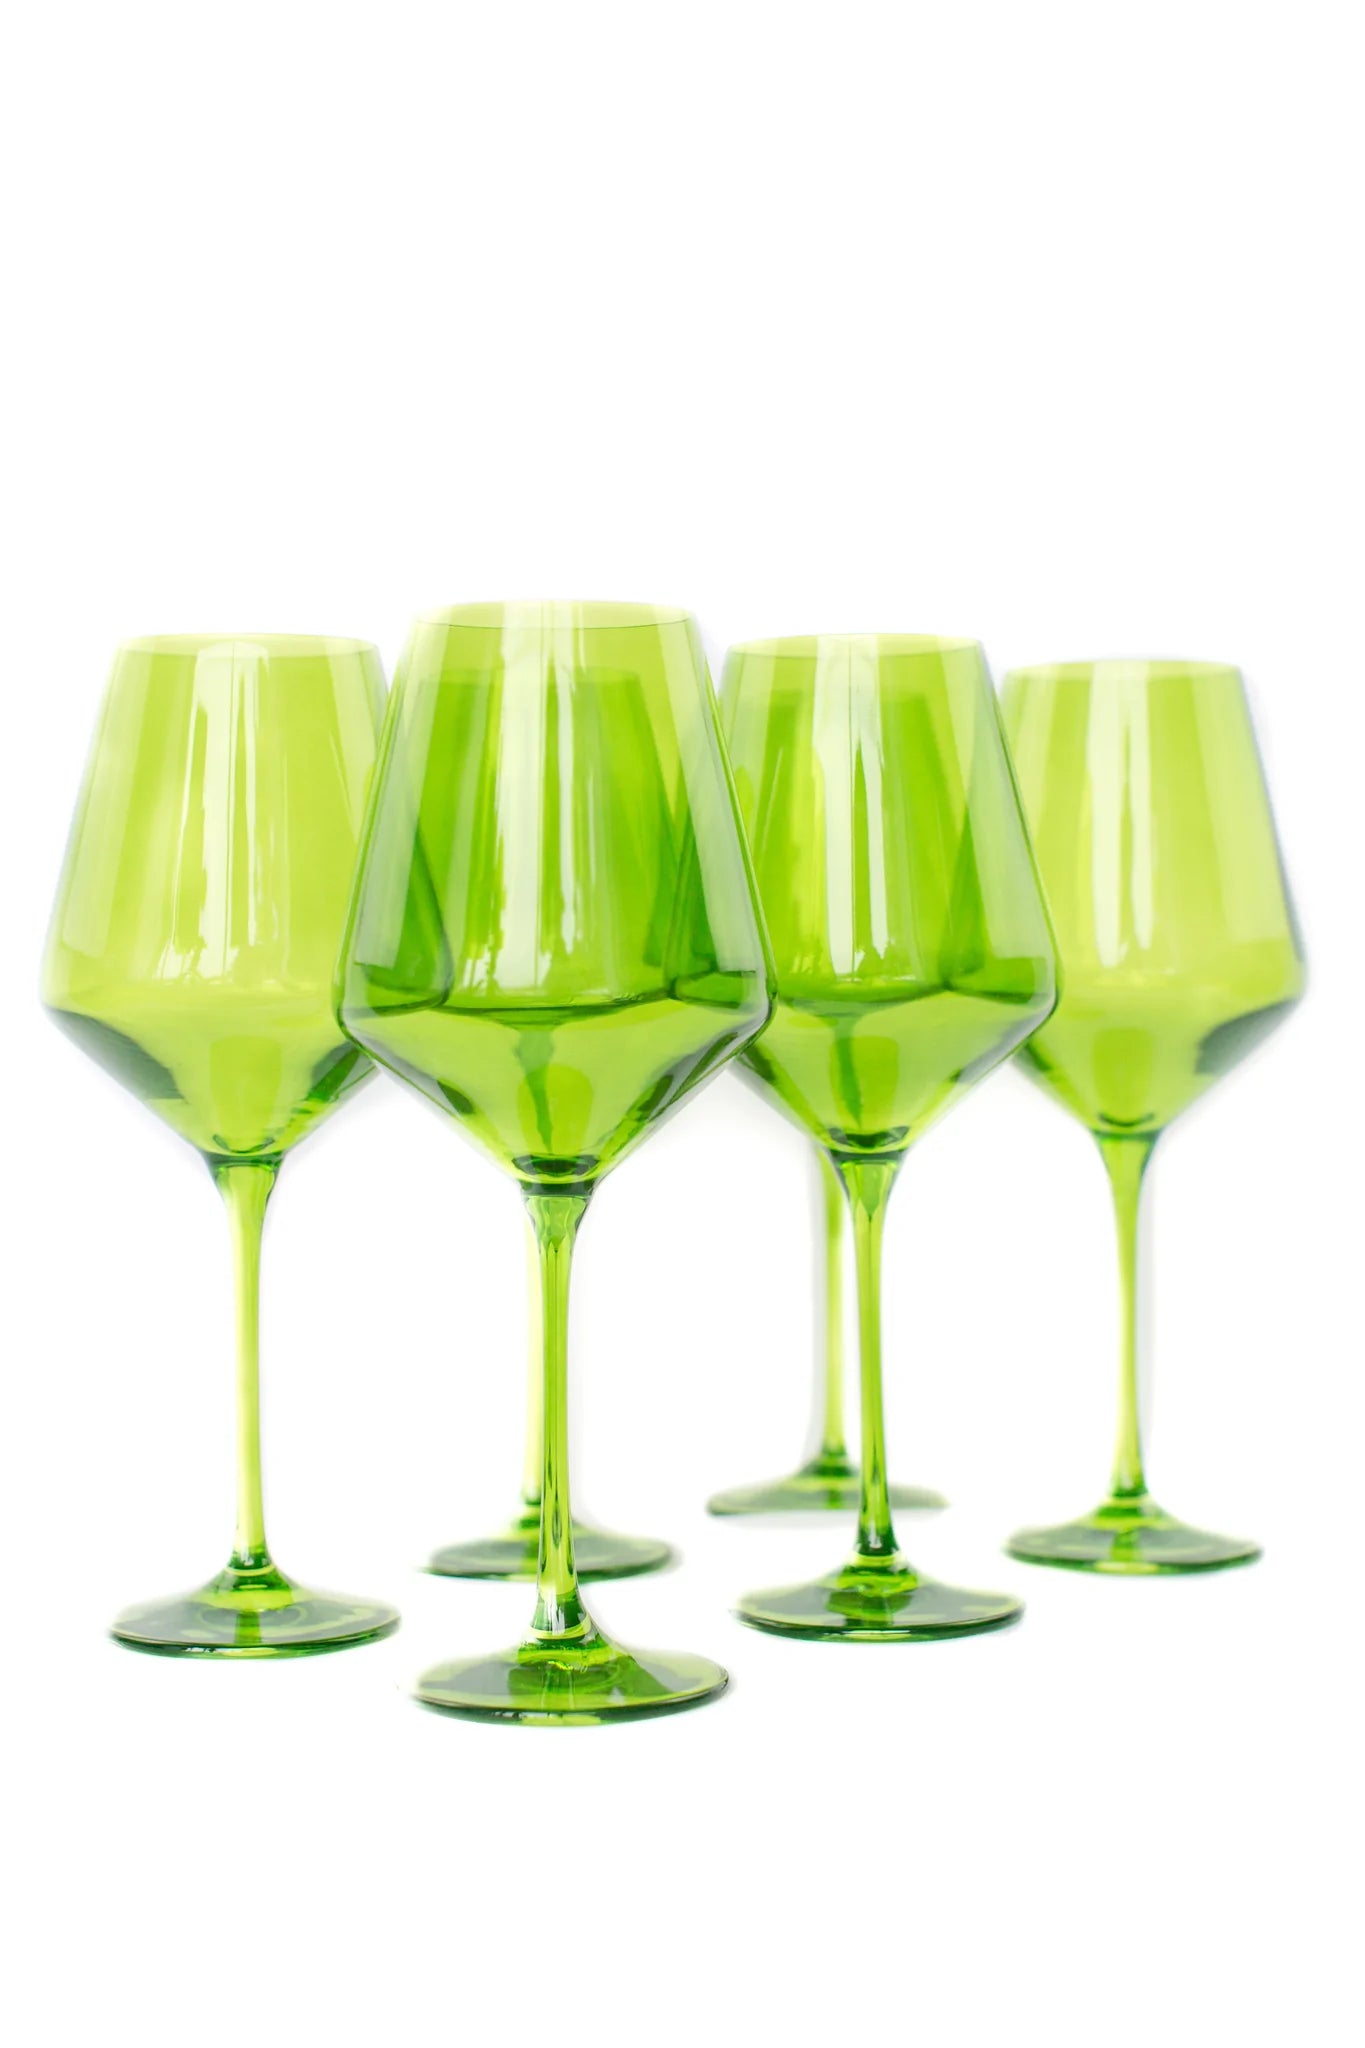 Estelle Colored Glass - Champagne Coupe Stemware - Set of 2 Mint Green